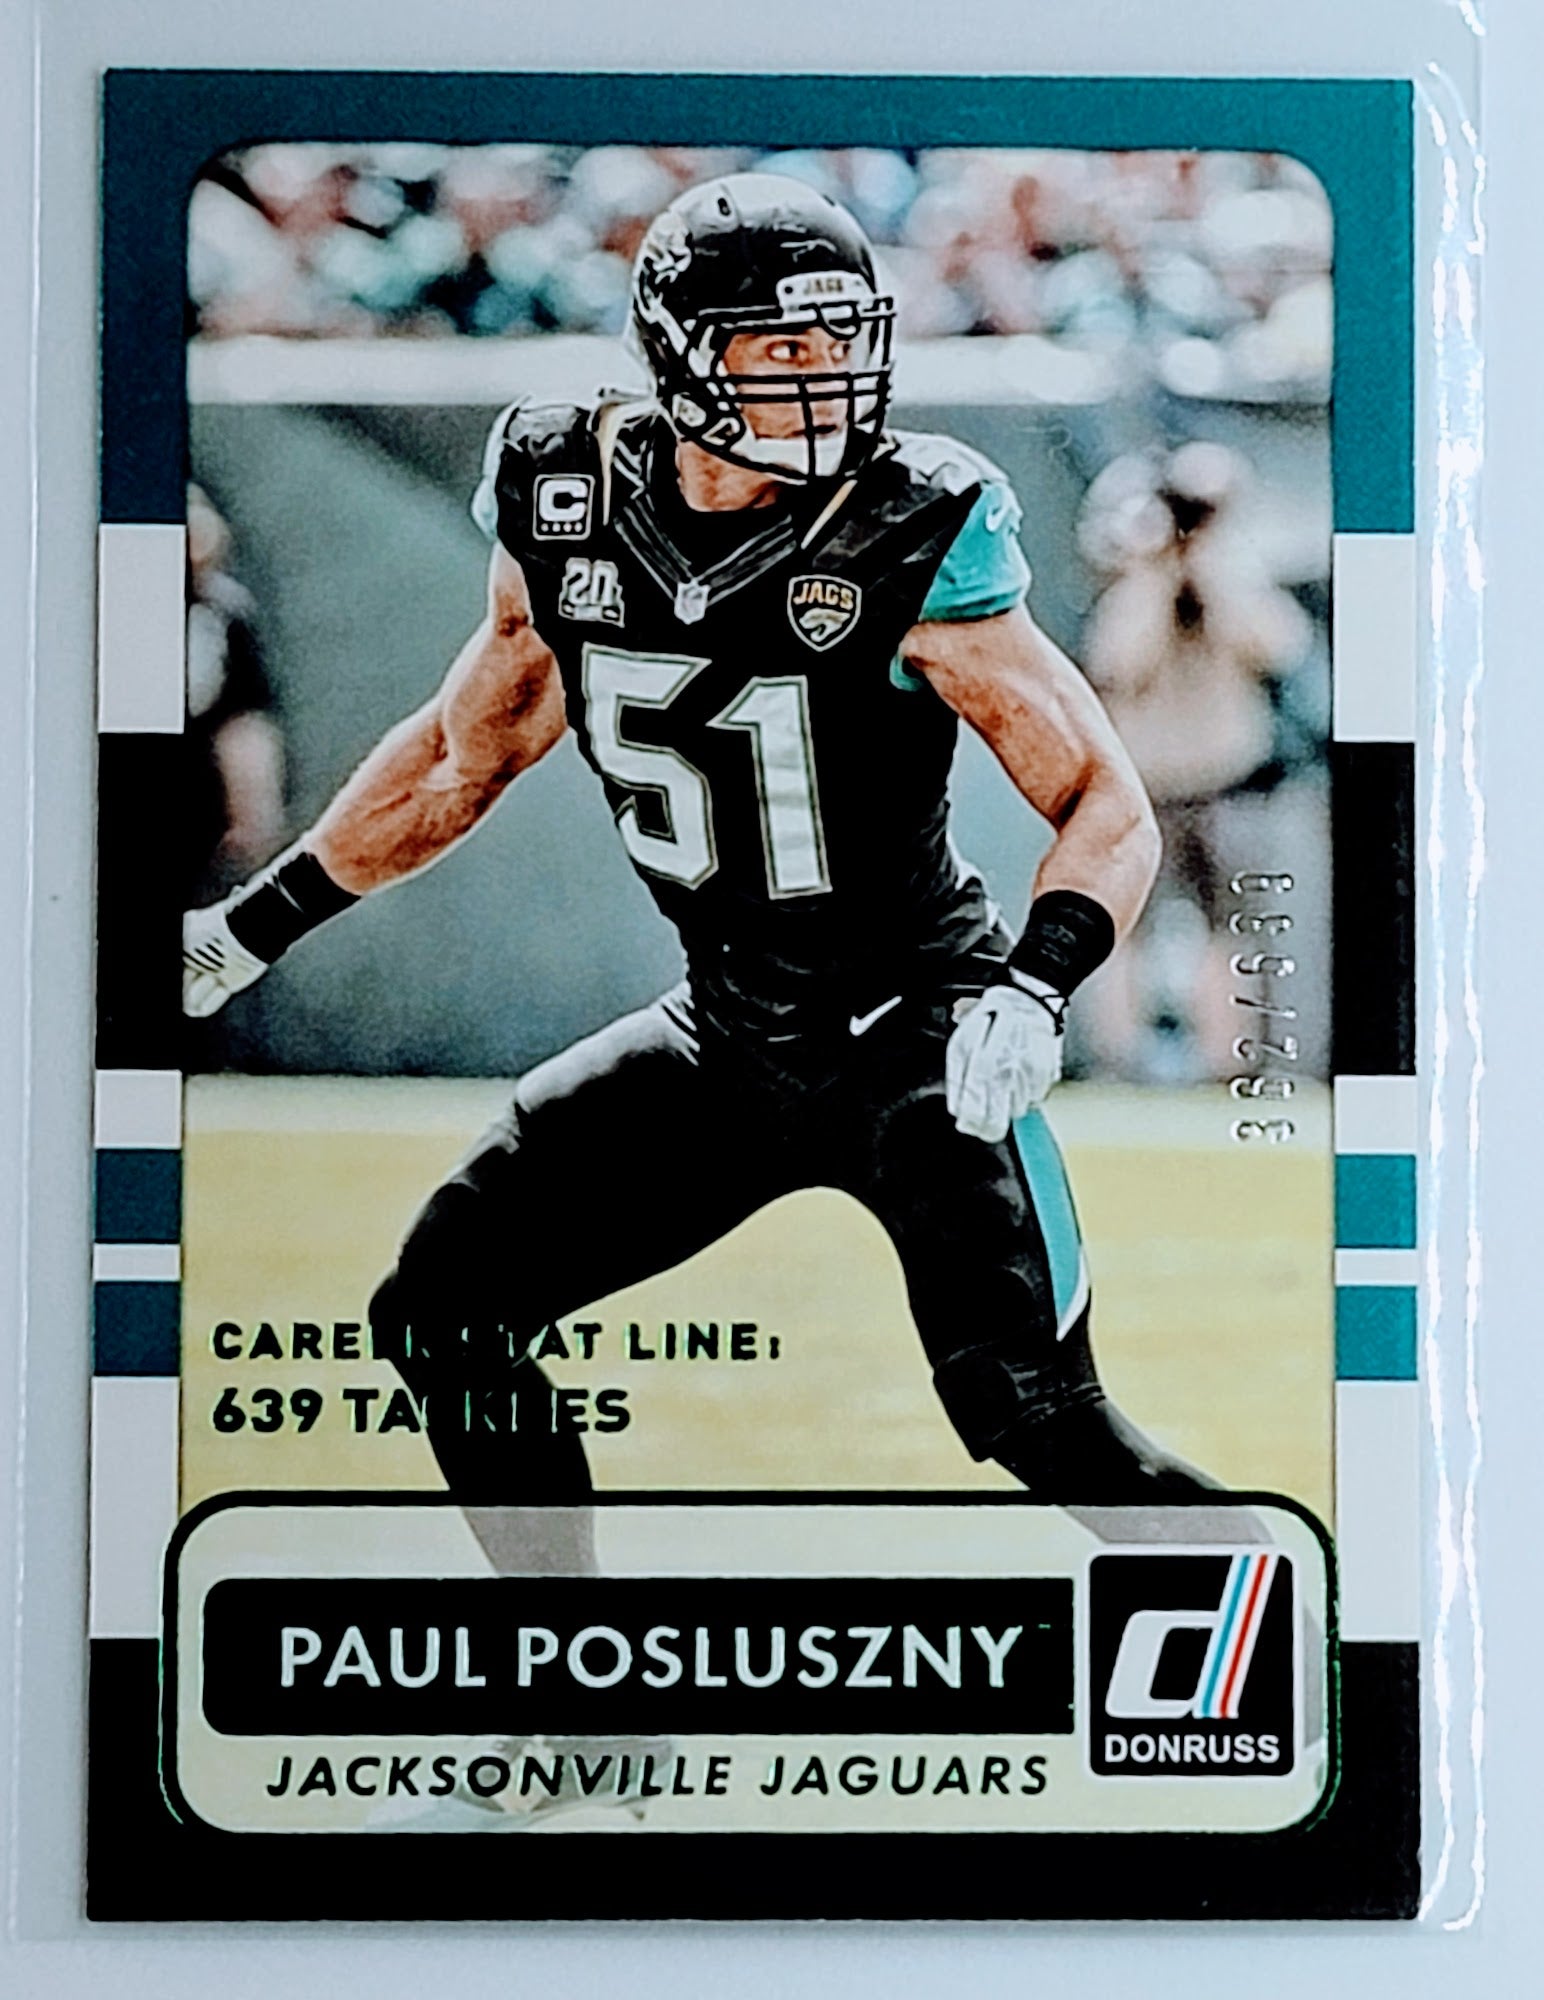 2015 Donruss Paul Posluszny
  Stat Line Career Green  SN639
  Jacksonville Jaguars Football Card TH1C4 simple Xclusive Collectibles   